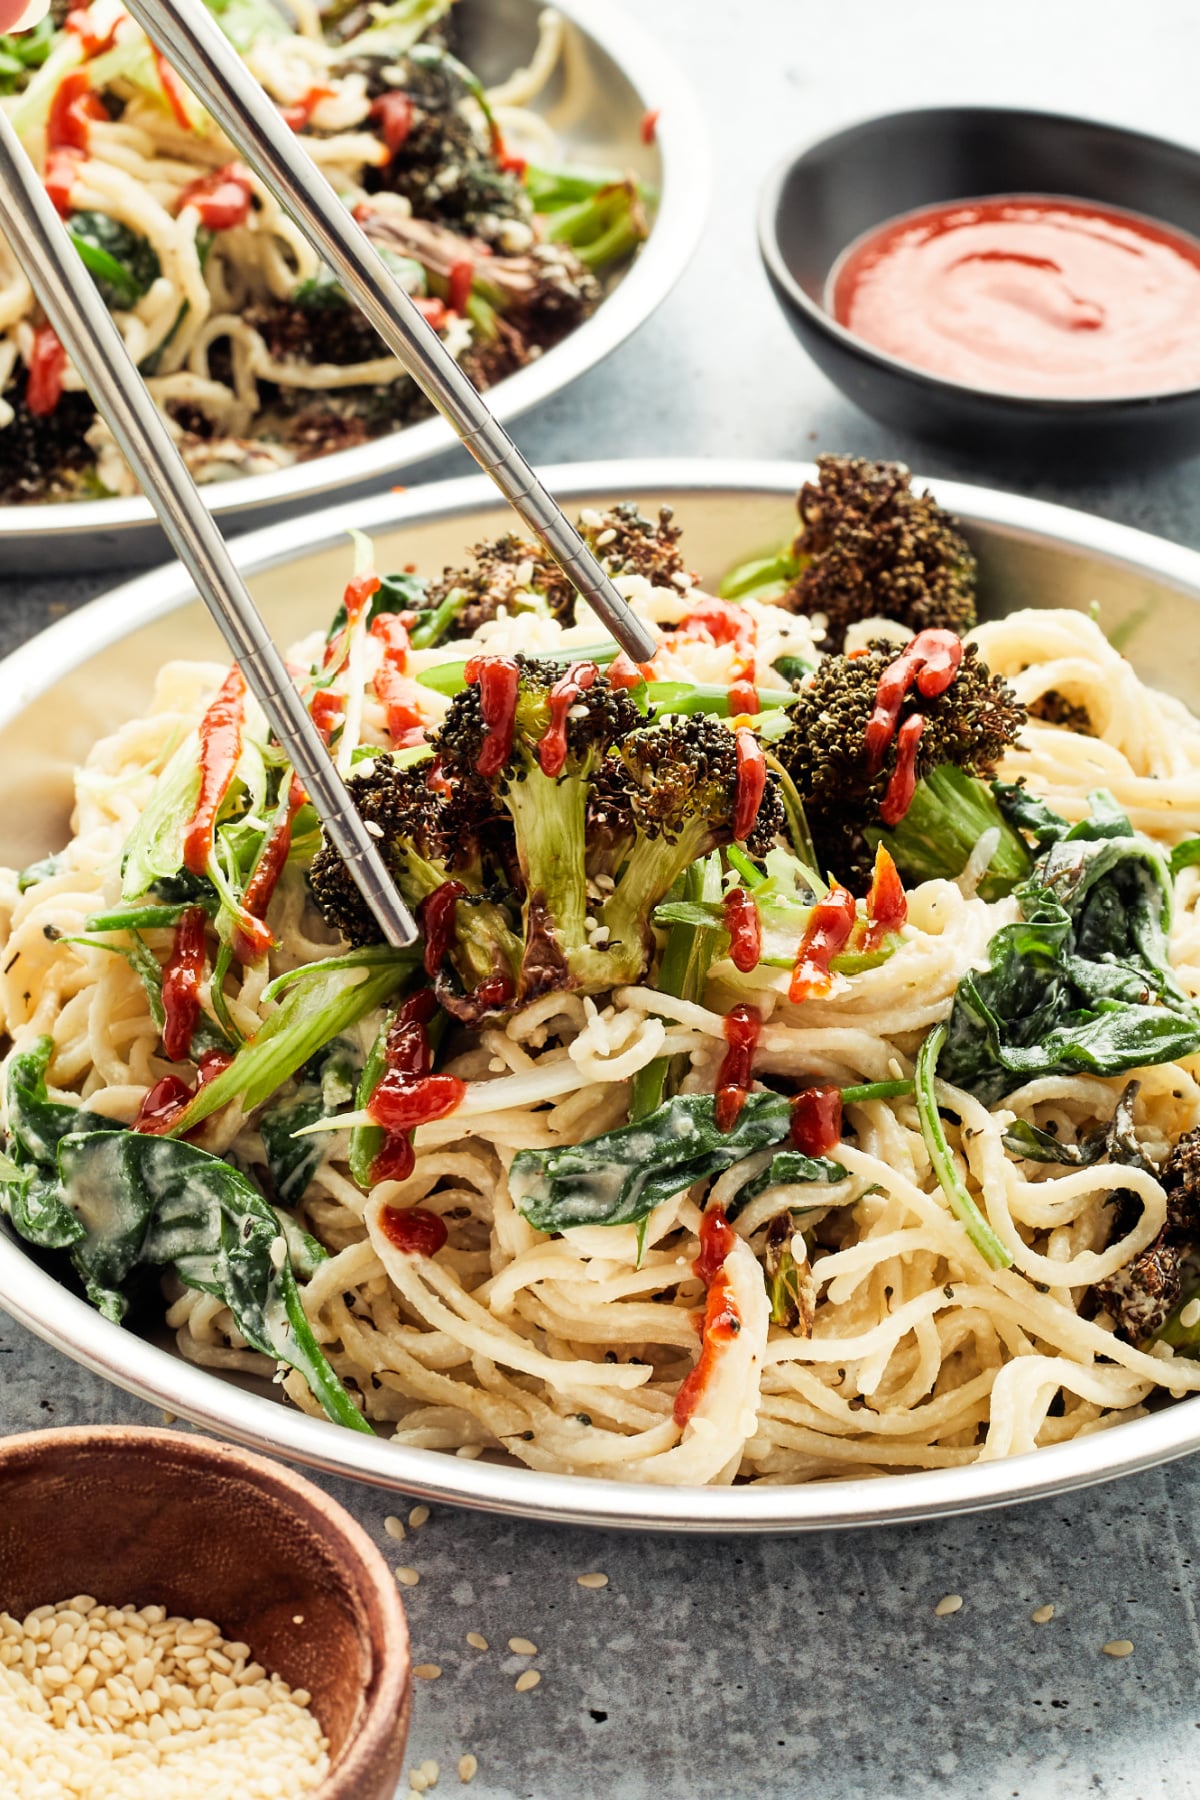 Two bowls of ginger sesame noodles with roasted broccoli. Silver chopsticks are about to lift a piece of broccoli from one bowl of noodles. A small bowl of sriracha sauce and a small bowl of sesame seeds sit to the side of the noodle bowls.